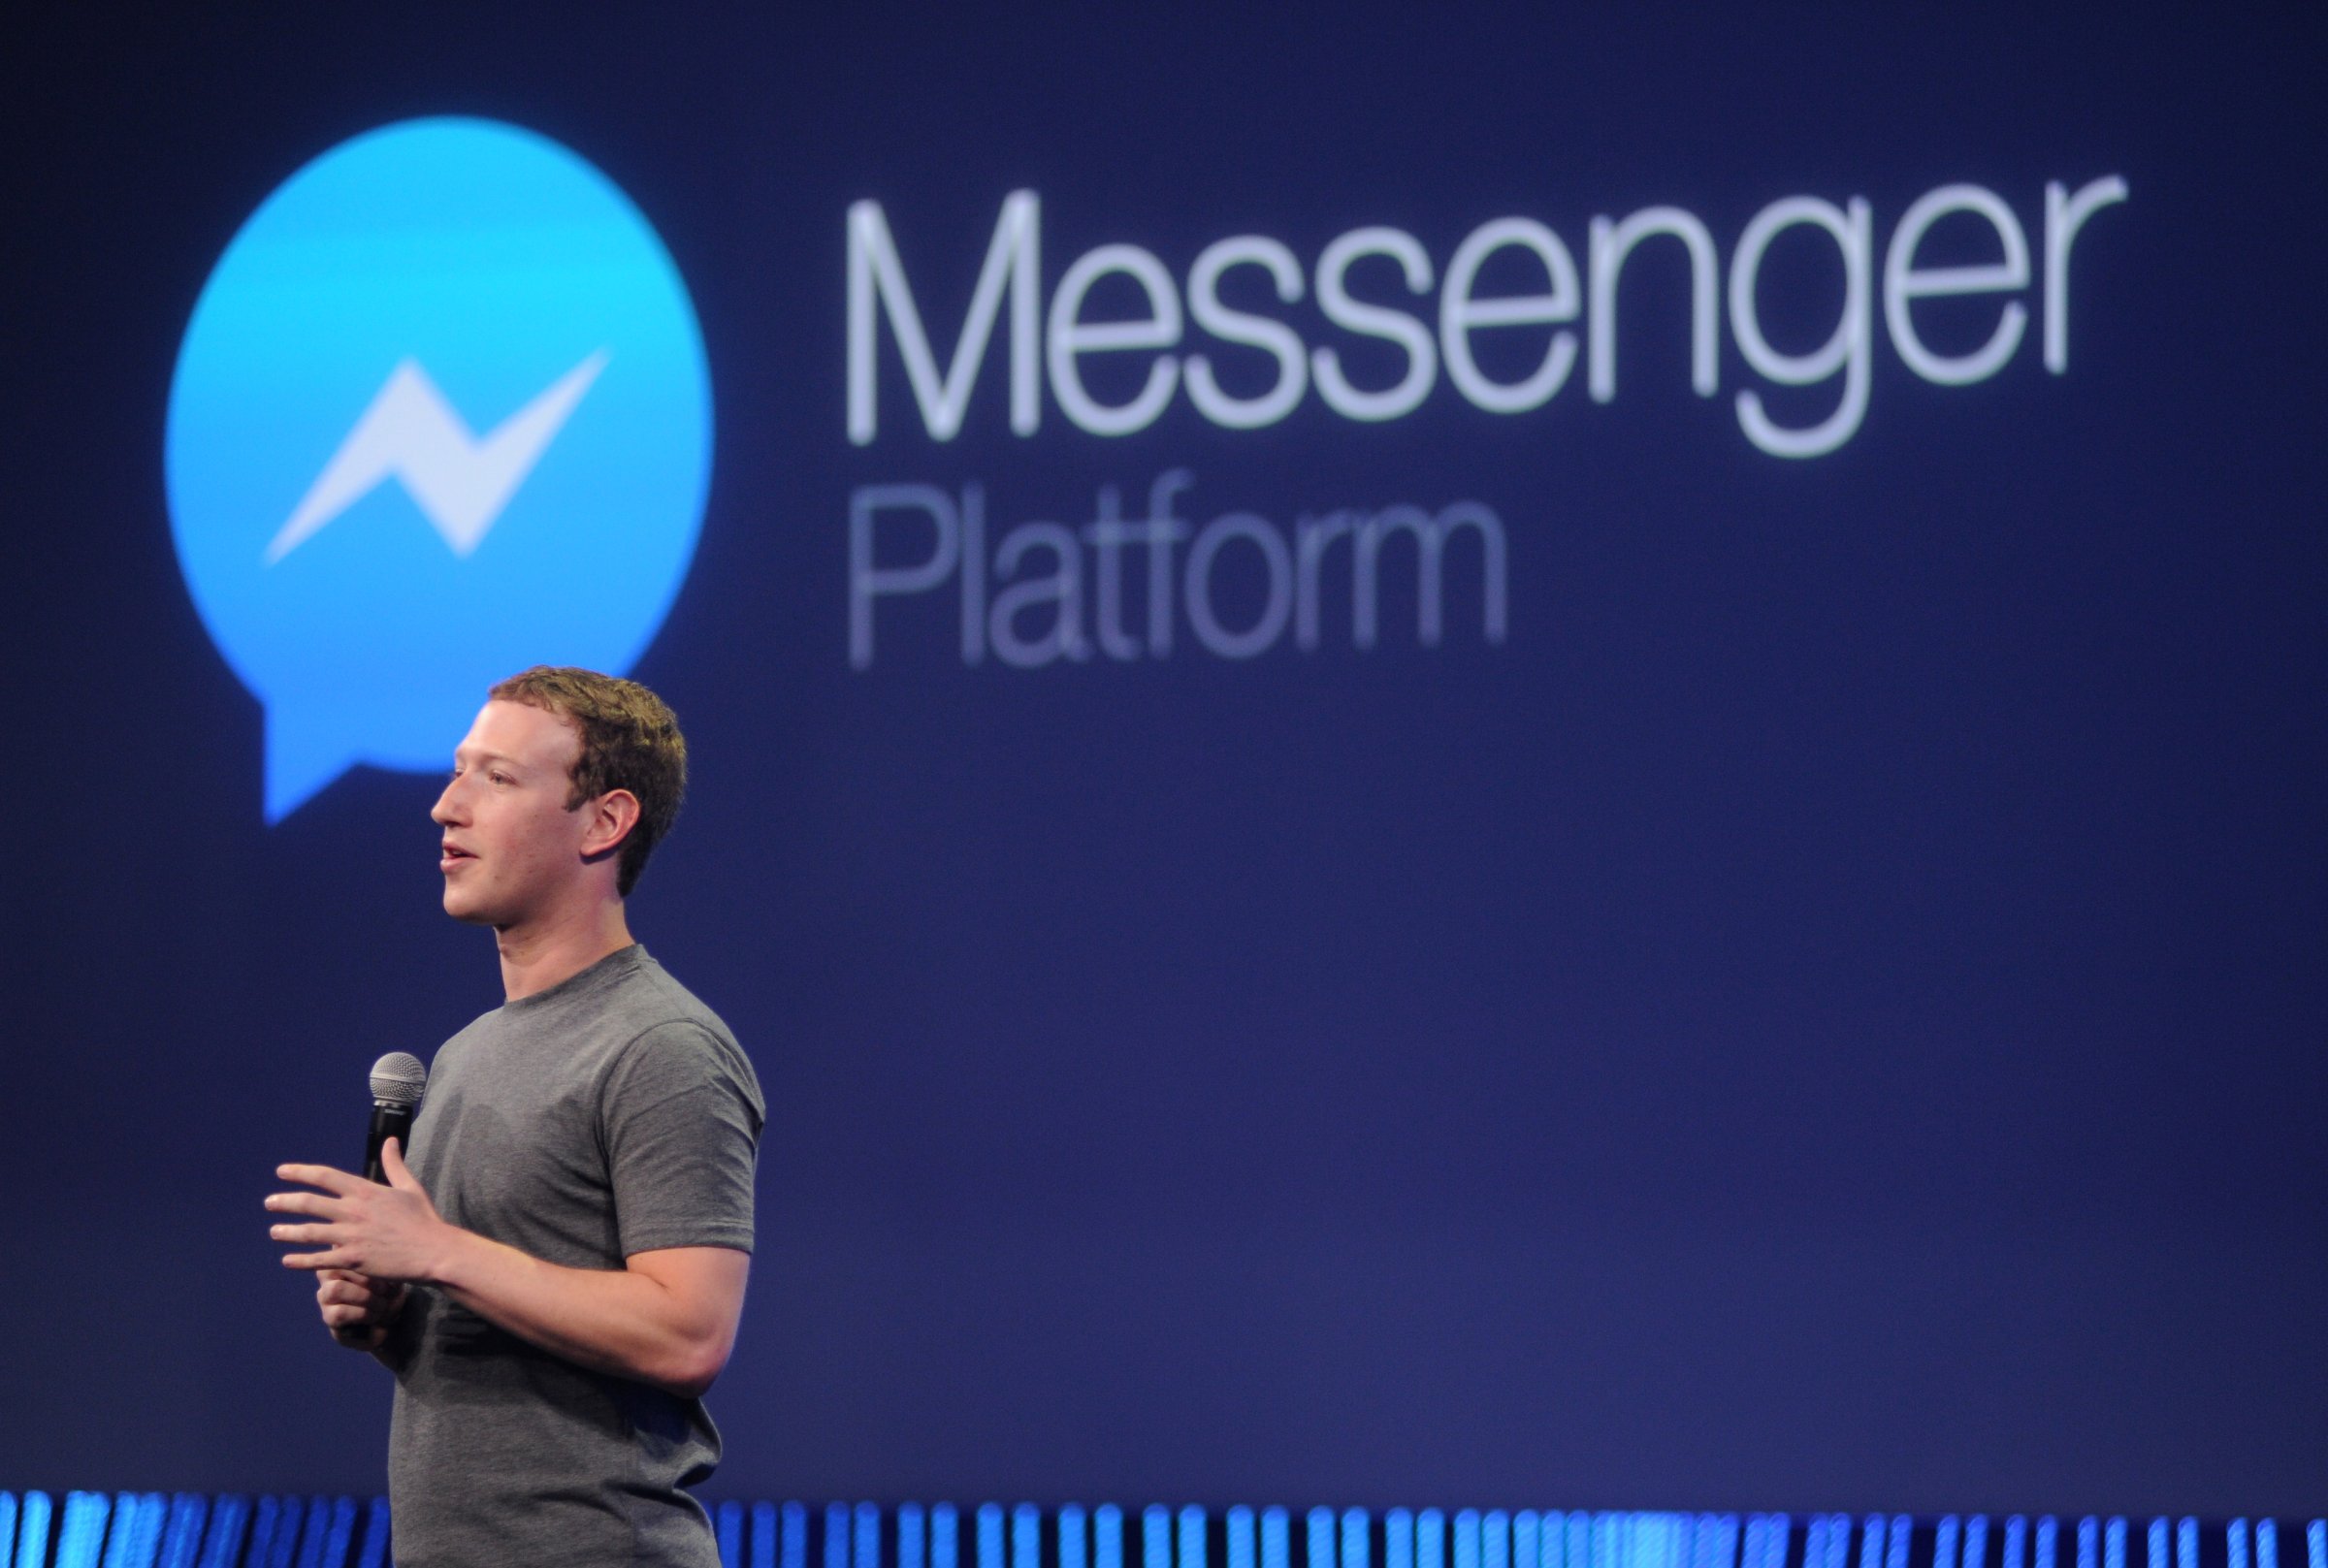 Facebook CEO Mark Zuckerberg introduces a new messenger platform at the F8 summit in San Francisco on March 25, 2015.